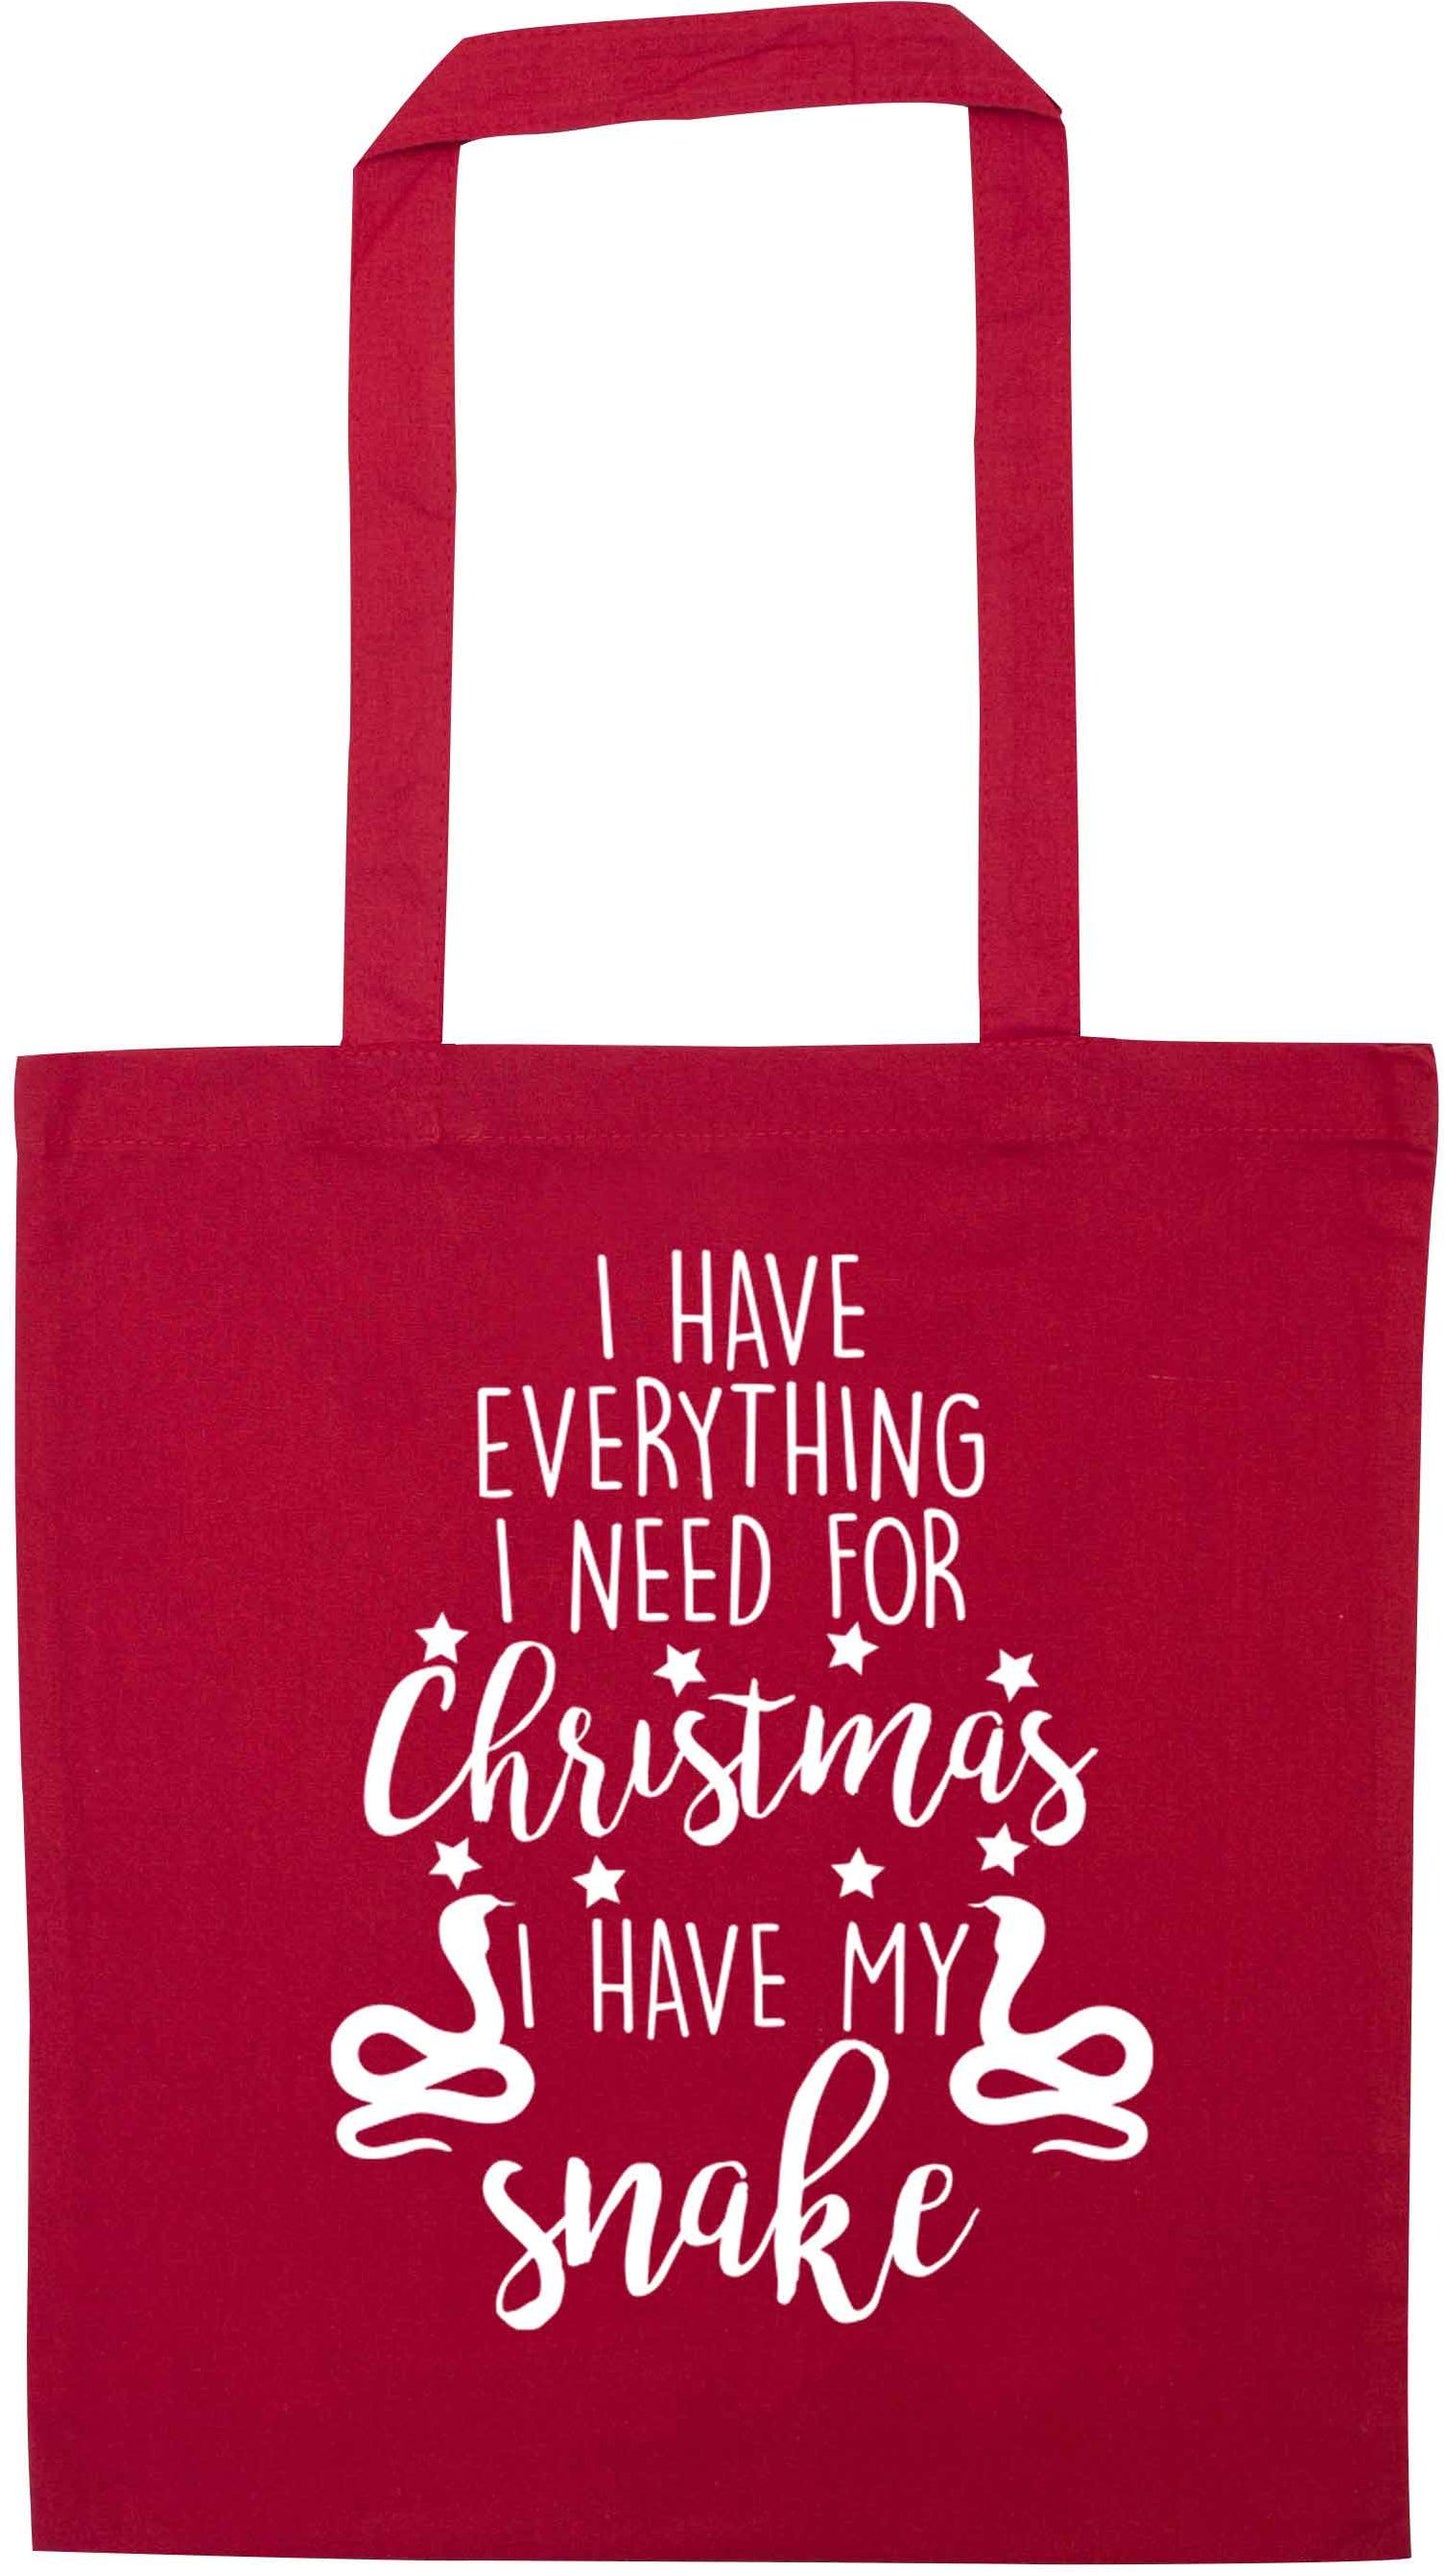 I have everything I need for Christmas I have my snake red tote bag